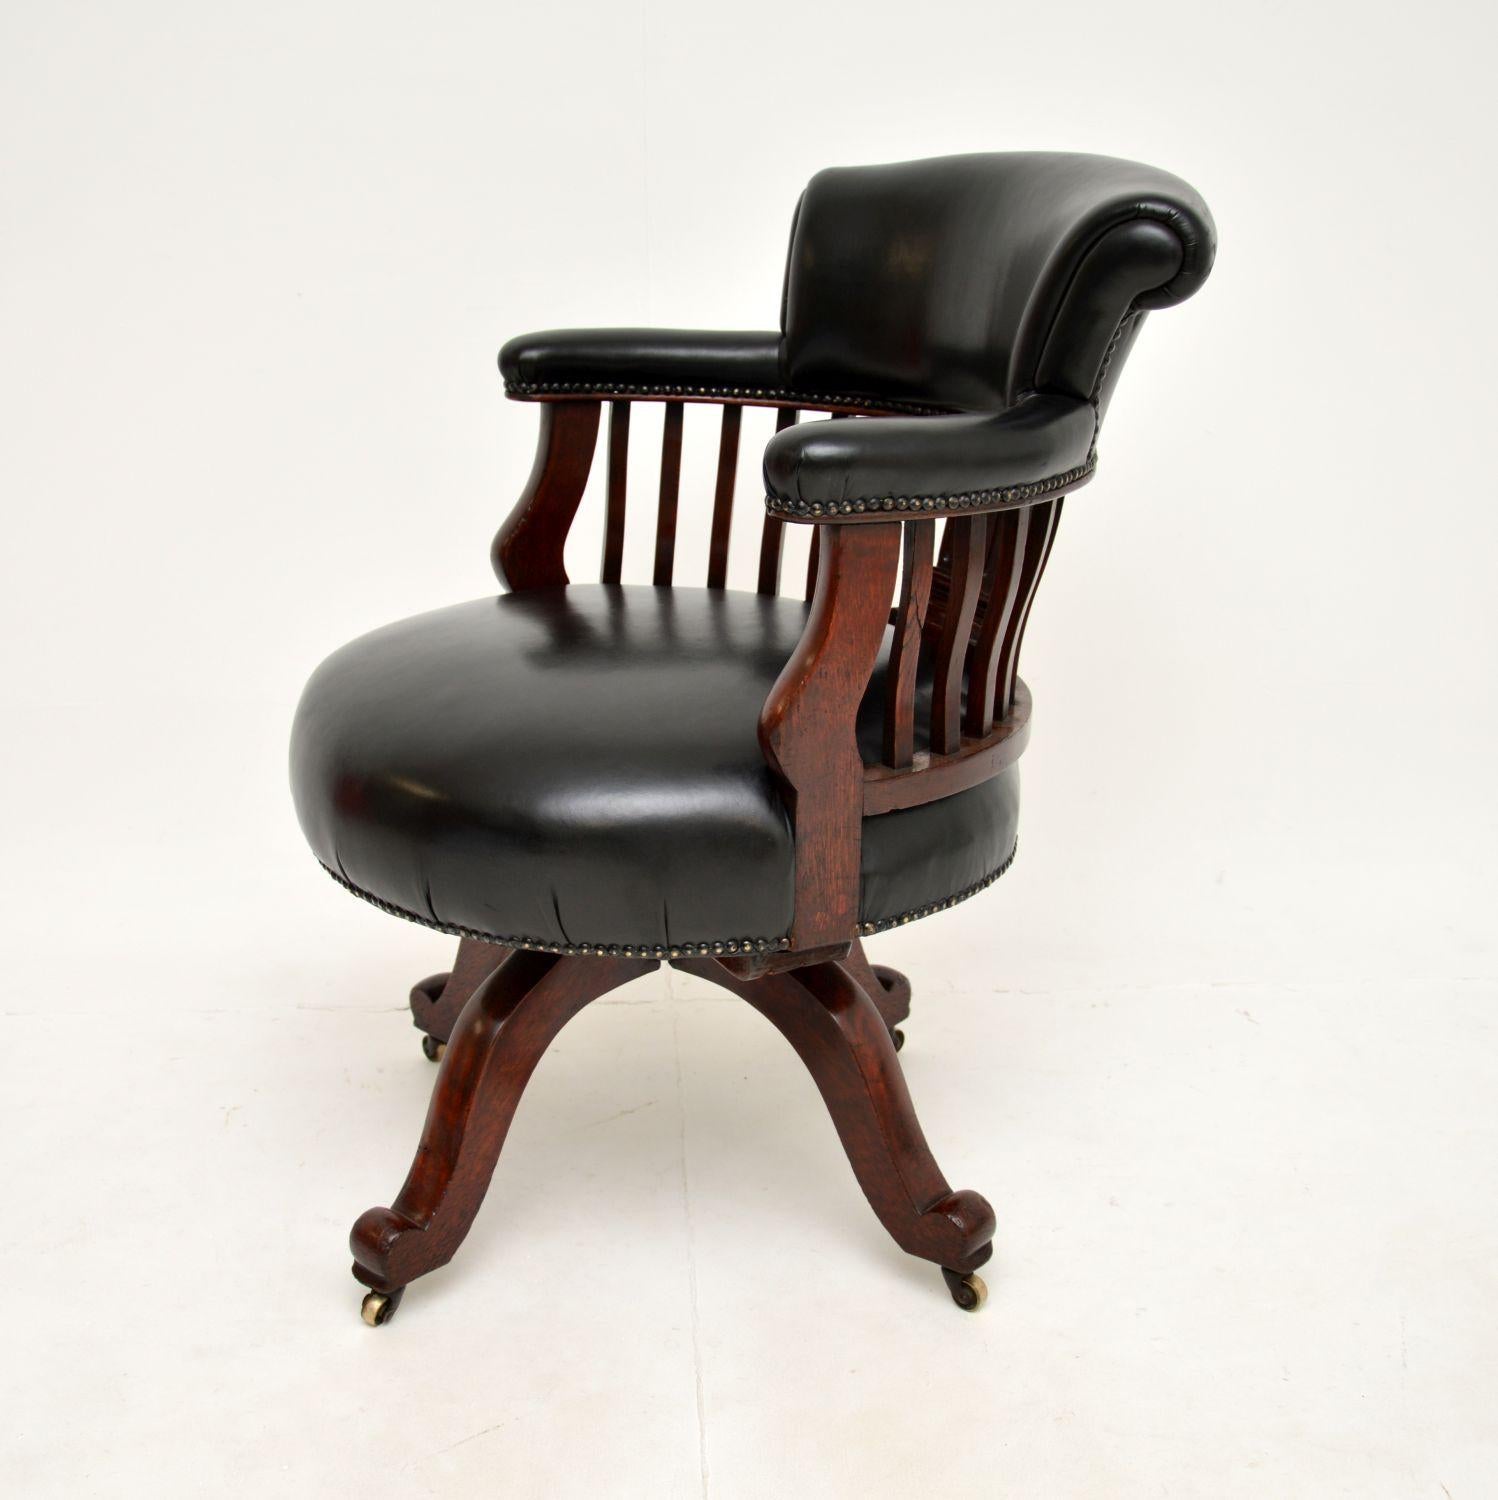 High Victorian Antique Victorian Leather Swivel Desk Chair